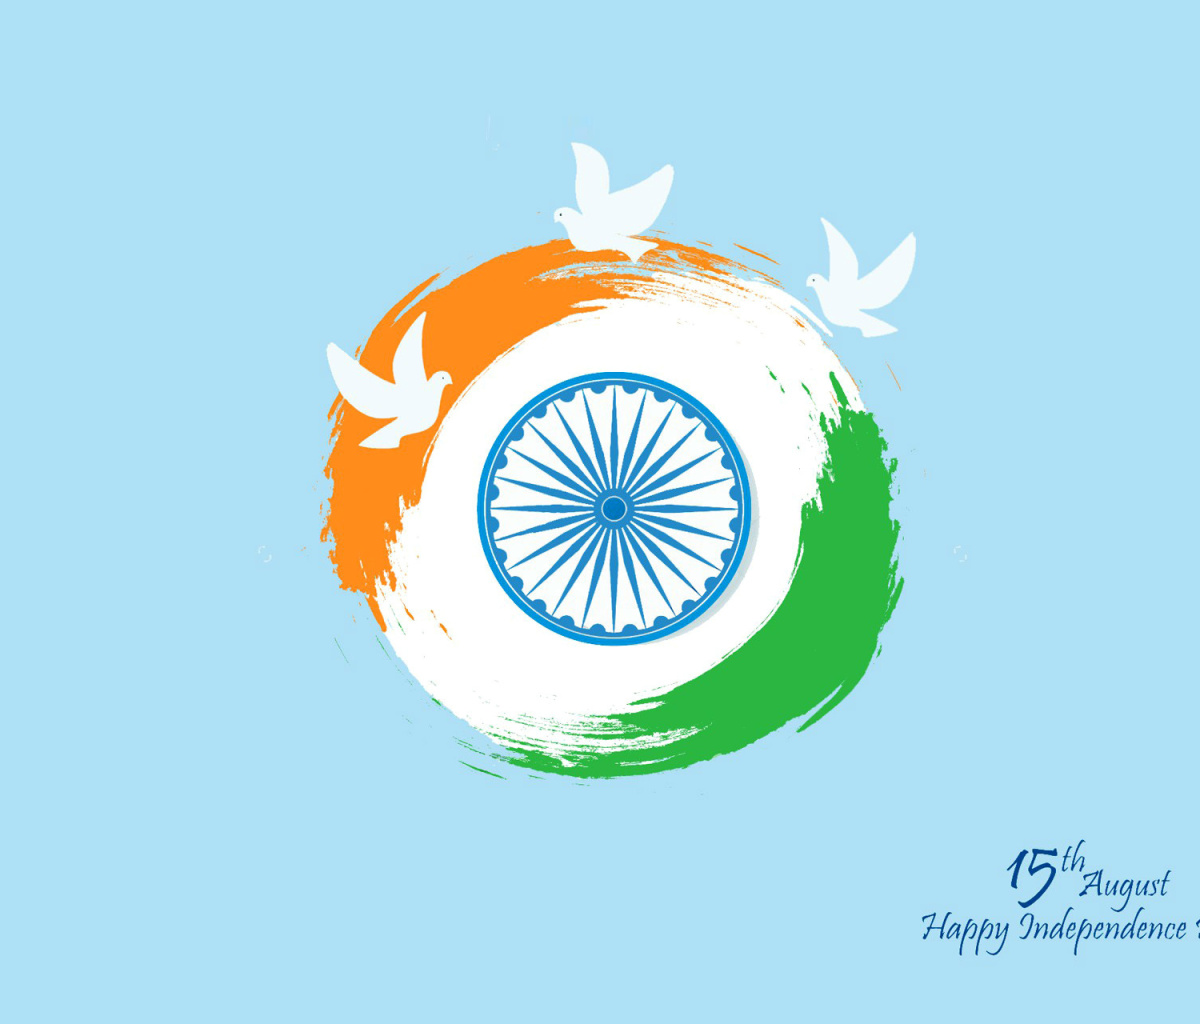 15th August Indian Independence Day screenshot #1 1200x1024